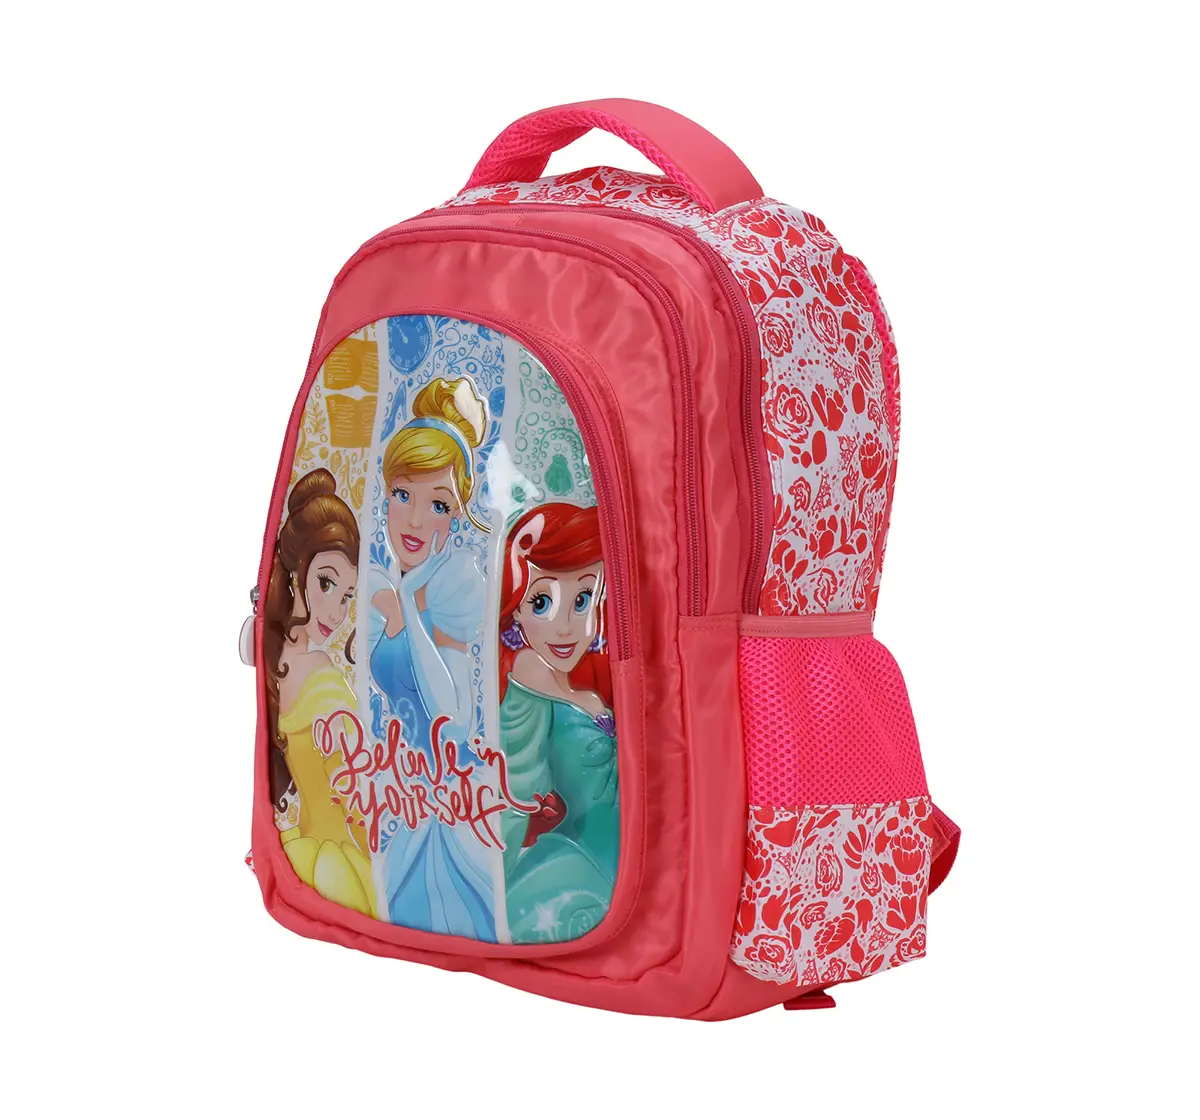 Disney Princess Believe In Yourself 14" Backpack Bags for age 3Y+ 